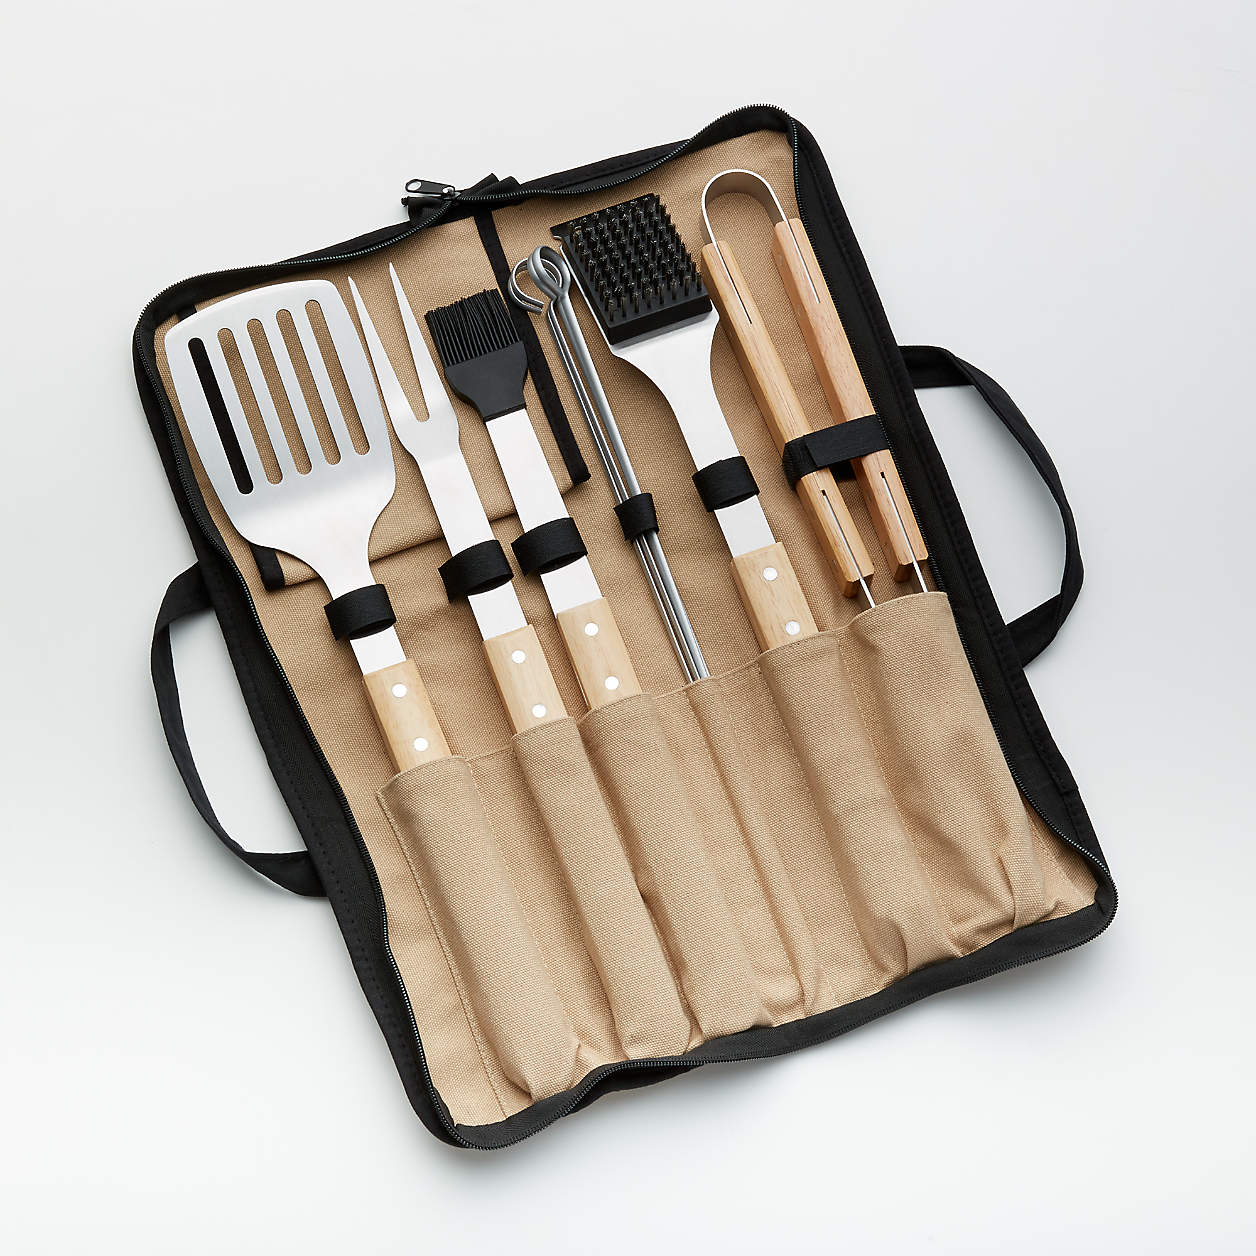 grilling tools in carrying case